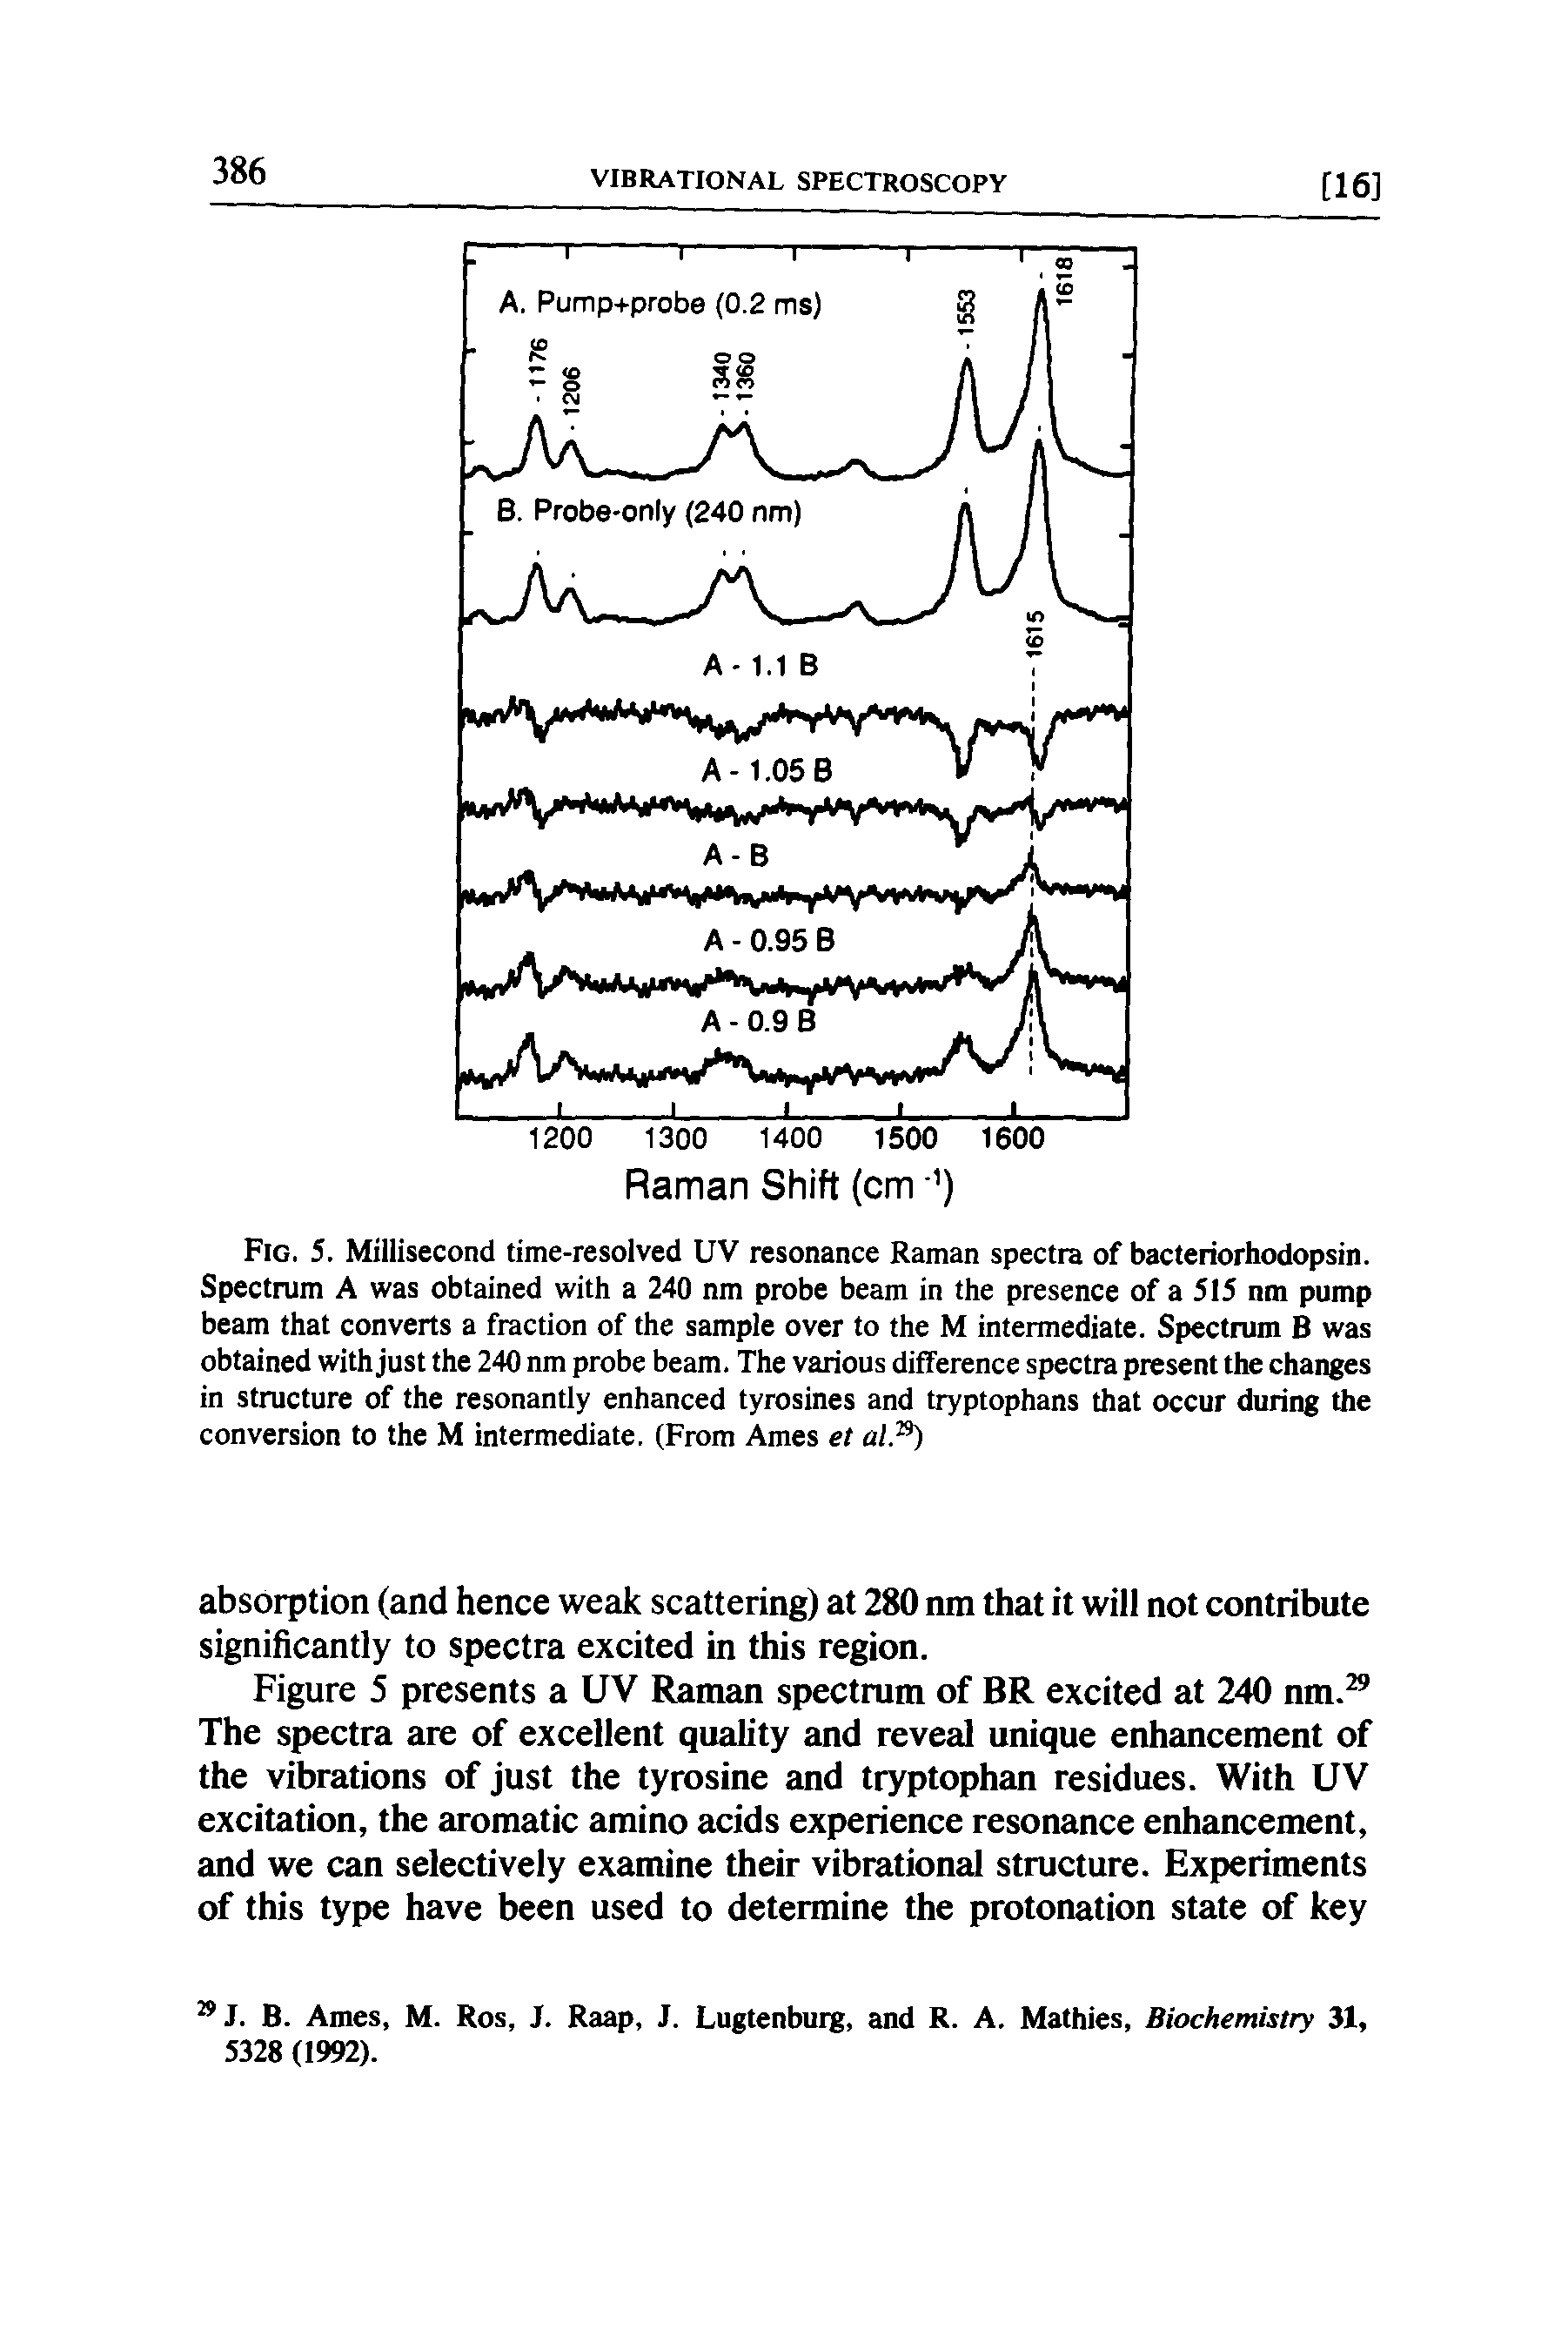 Fig. 5. Millisecond time-resolved UV resonance Raman spectra of bacteriorhodopsin. Spectrum A was obtained with a 240 nm probe beam in the presence of a 515 nm pump beam that converts a fraction of the sample over to the M intermediate. Spectrum B was obtained with just the 240 nm probe beam. The various difference spectra present the changes in structure of the resonantly enhanced tyrosines and tryptophans that occur during the conversion to the M intermediate. (From Ames et alP ...